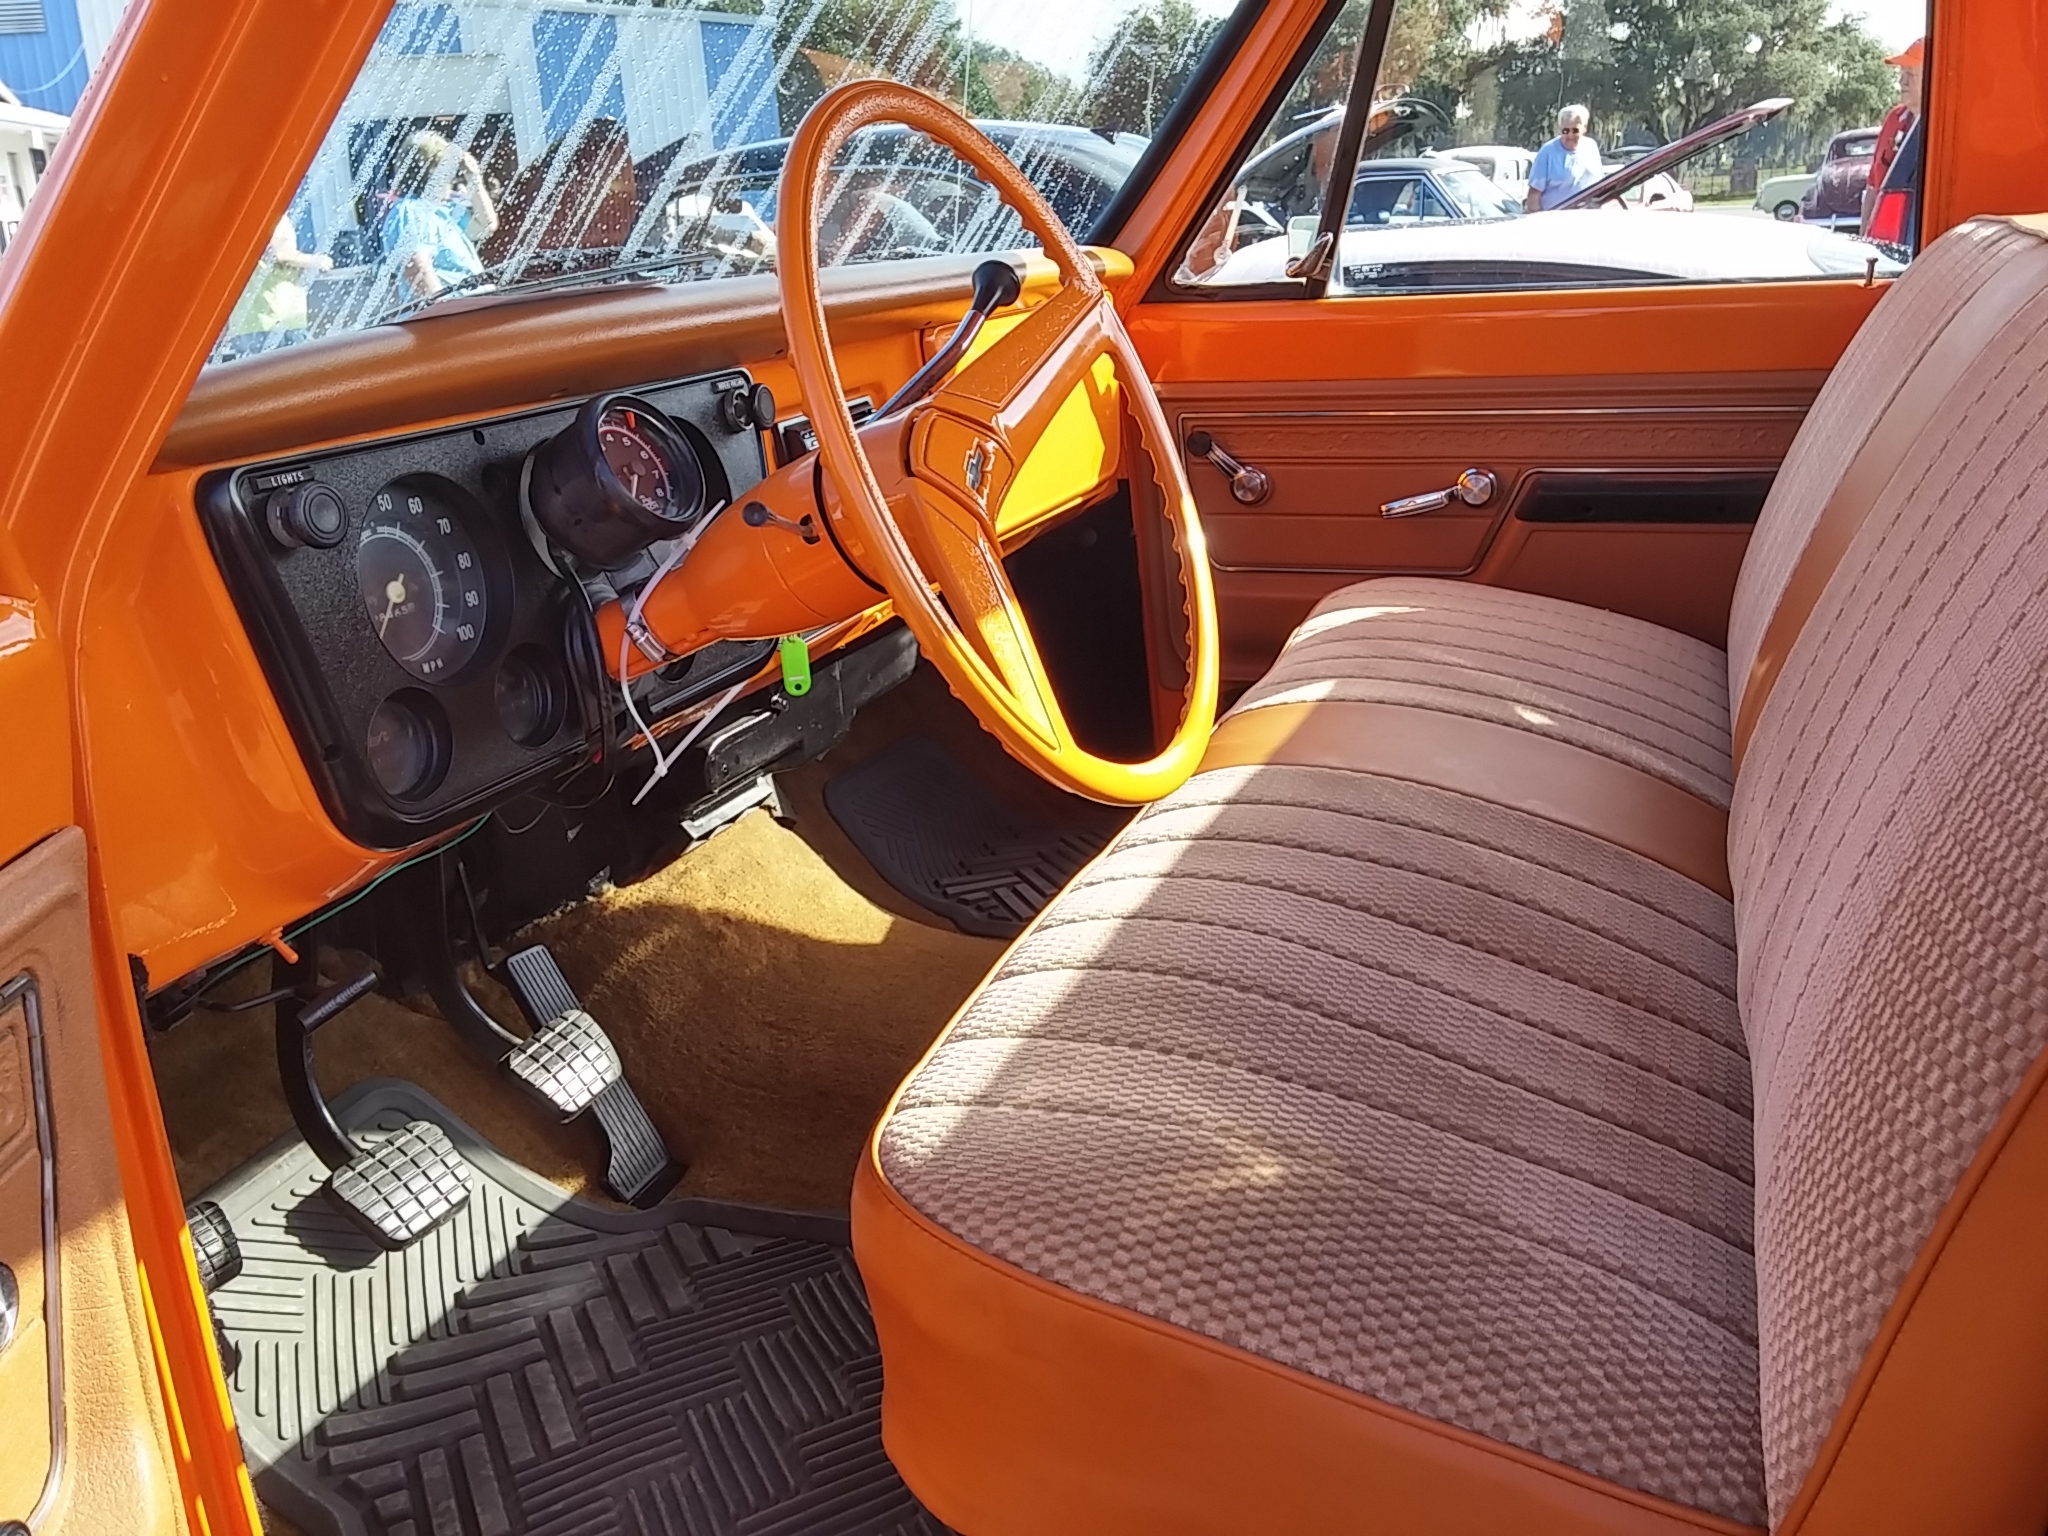 6th Image of a 1970 CHEVROLET C10